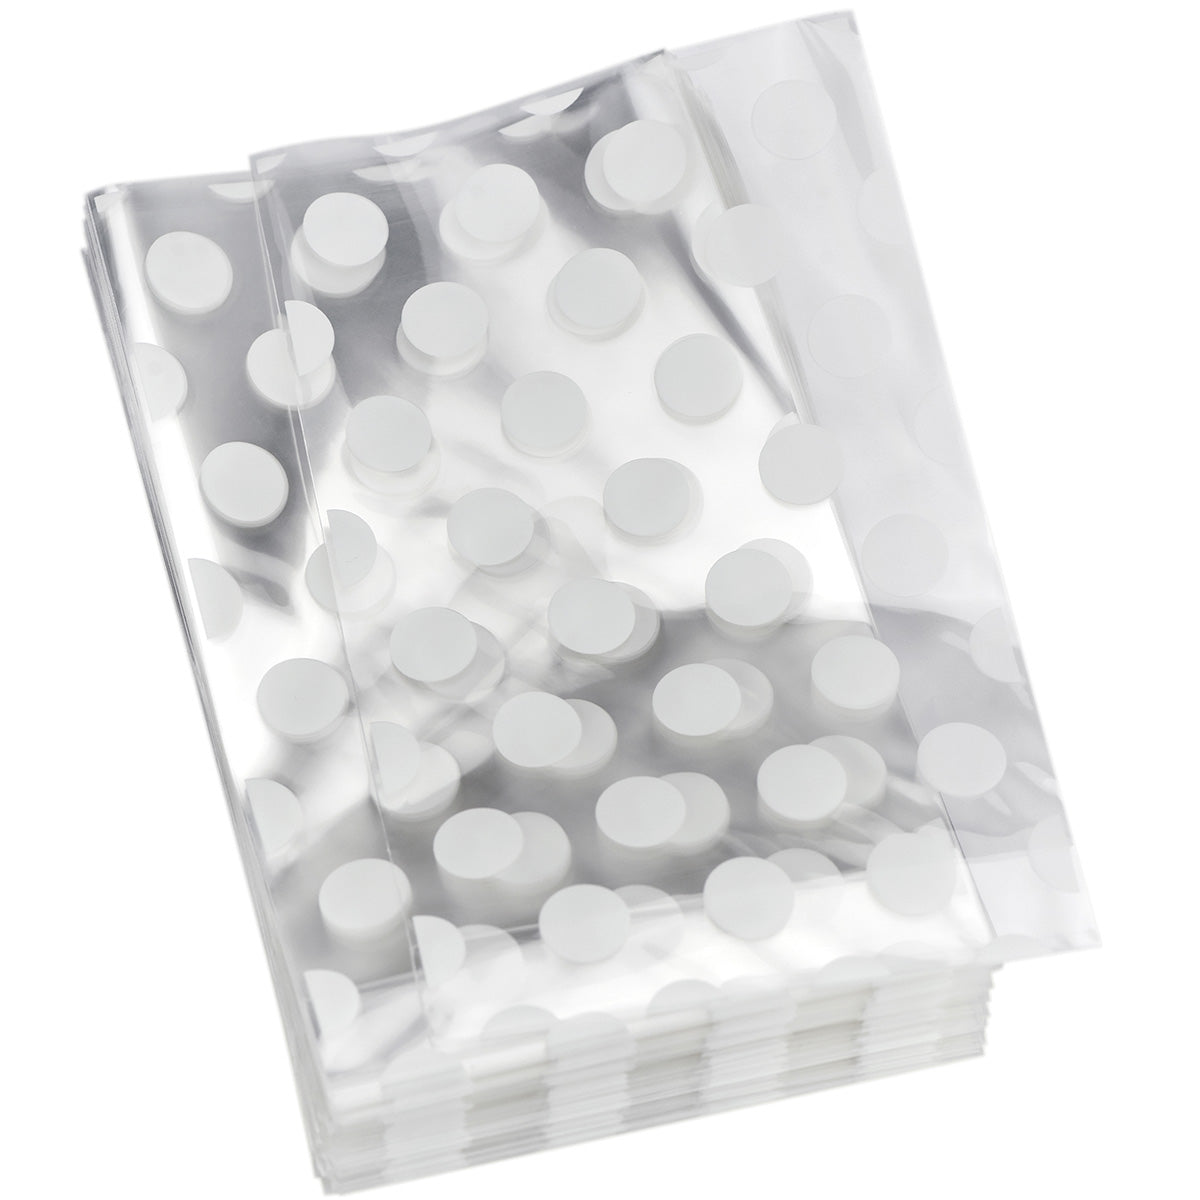 White Polka Dots Plastic Gift Bags 100 Pieces